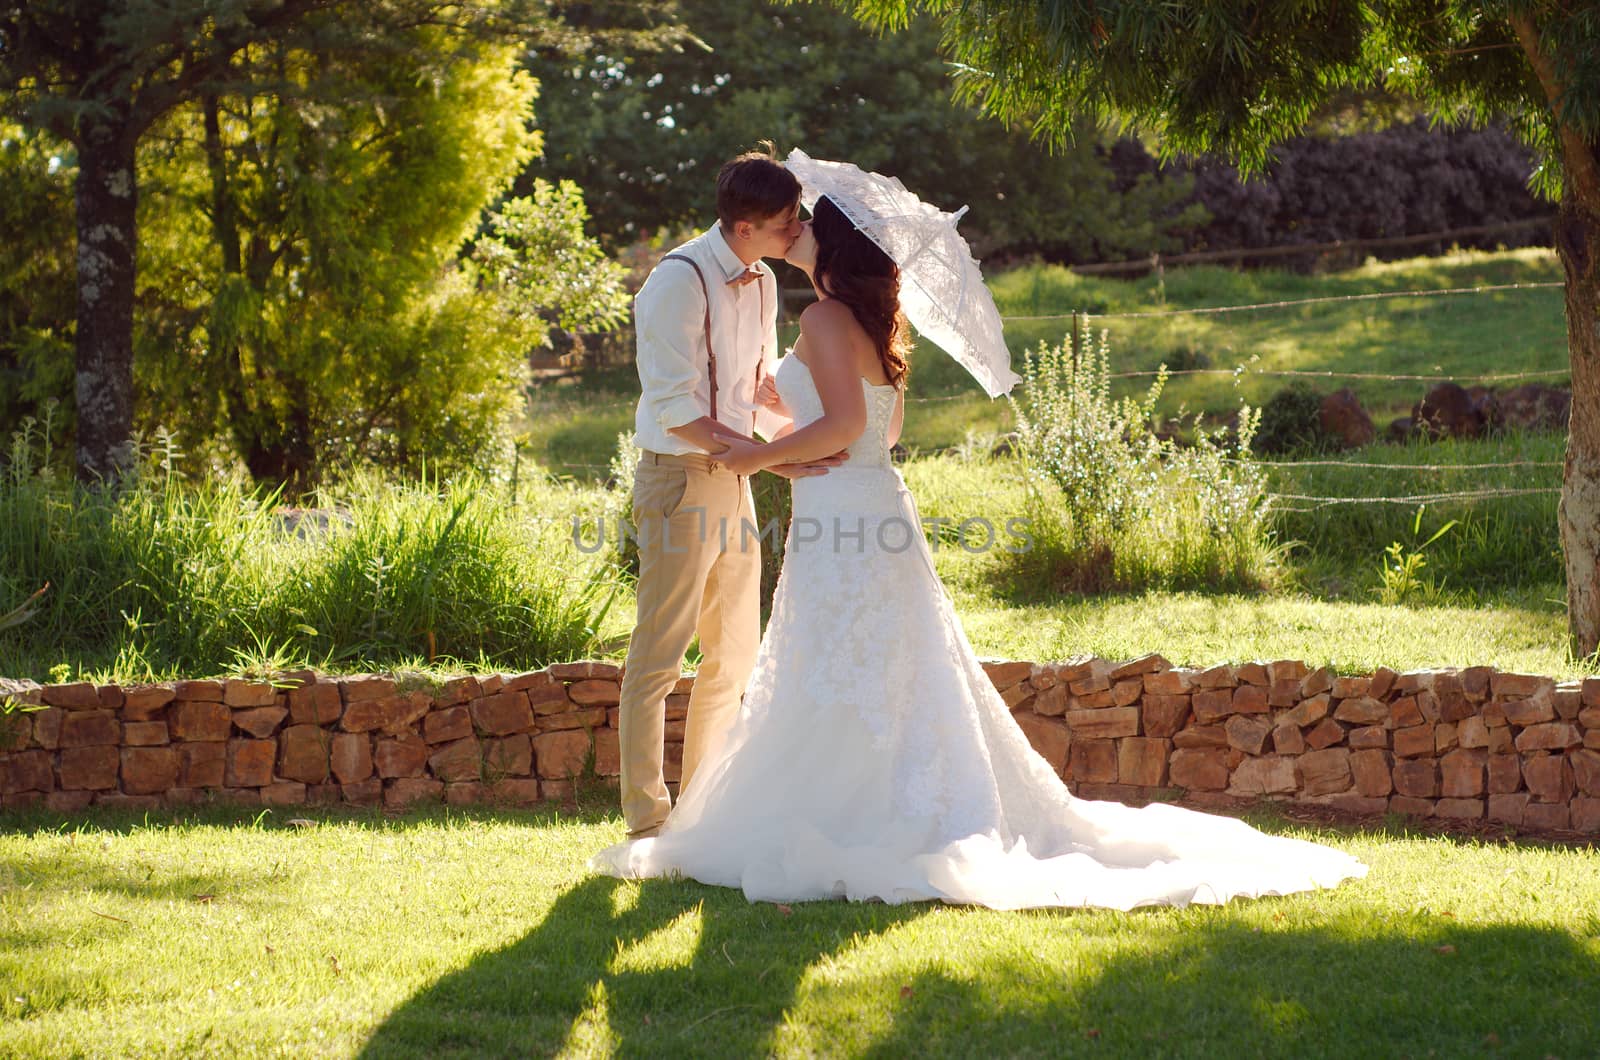 Bride and groom kissing with parasol in outside garden wedding ceremony